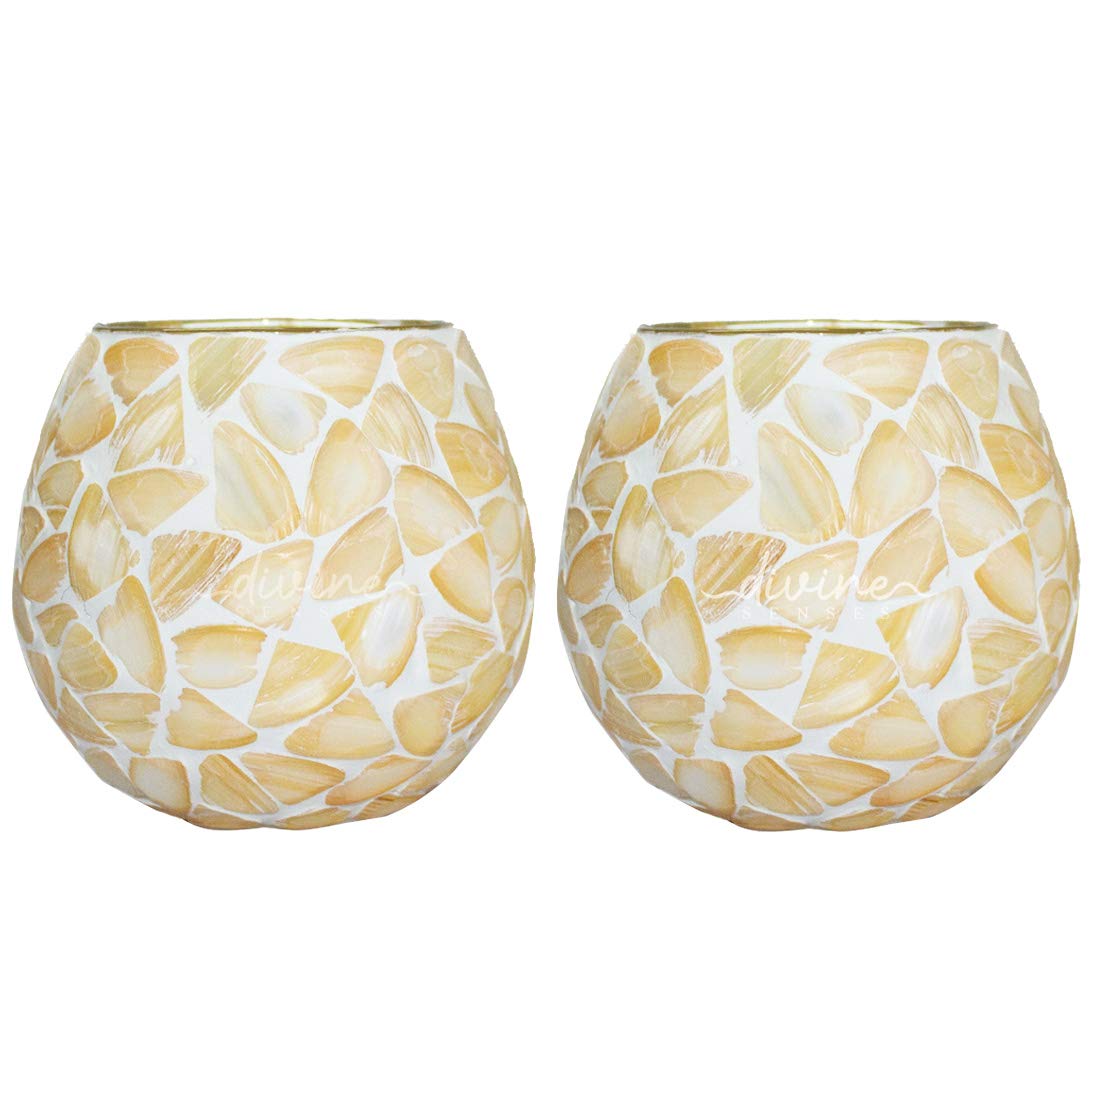 Mosaic Crackle Glass Tealight Candle Holder (Pack of 2)Gold